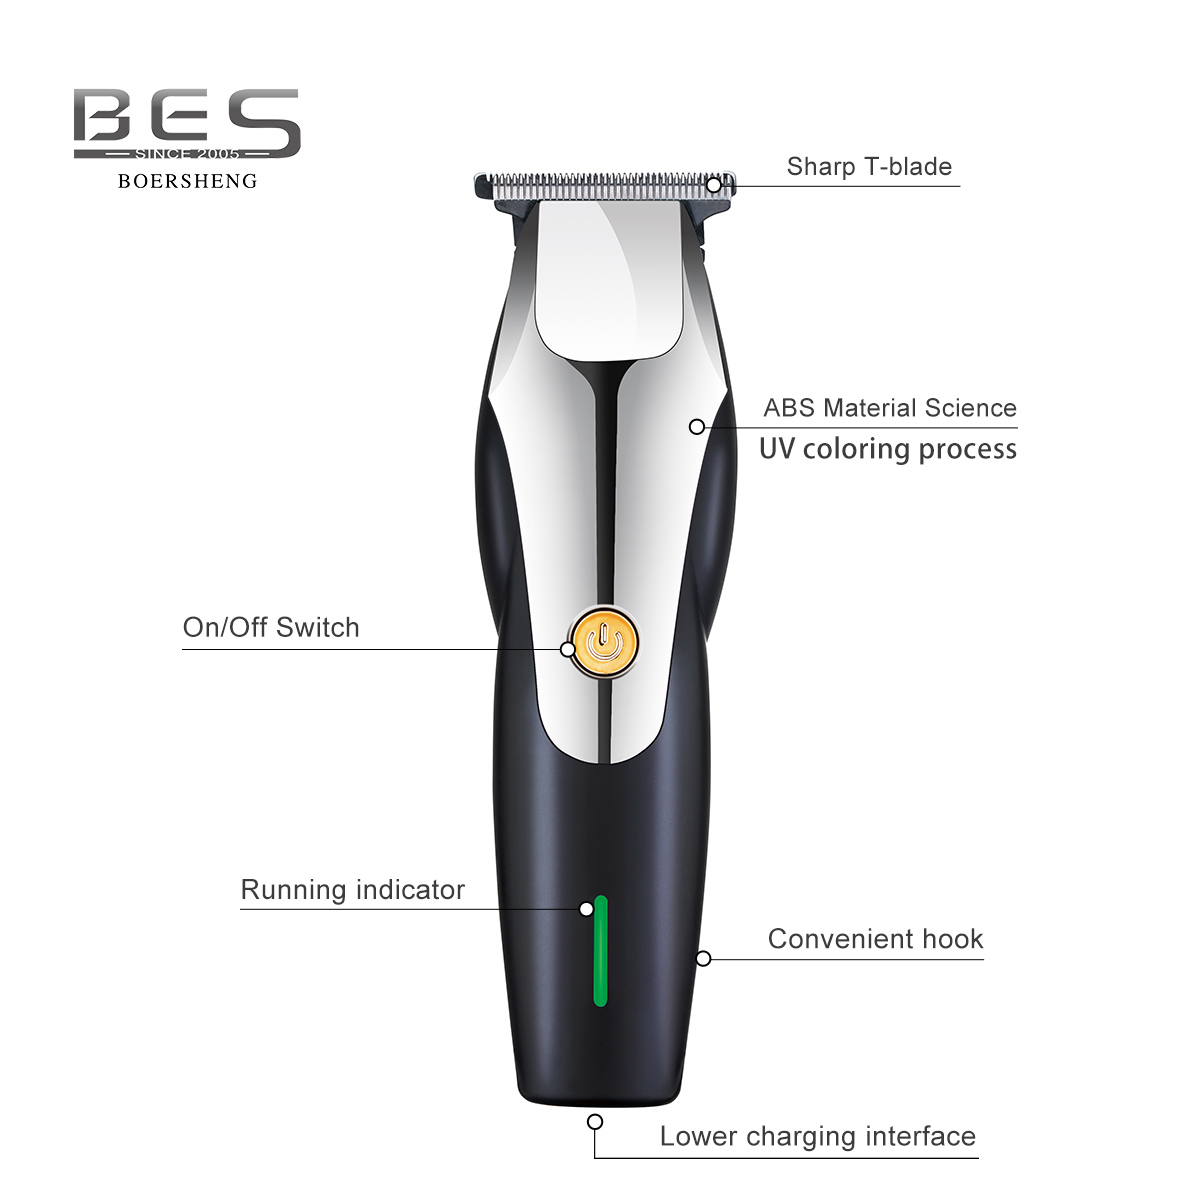 Professional Hair Trimmer with Detachable Blade